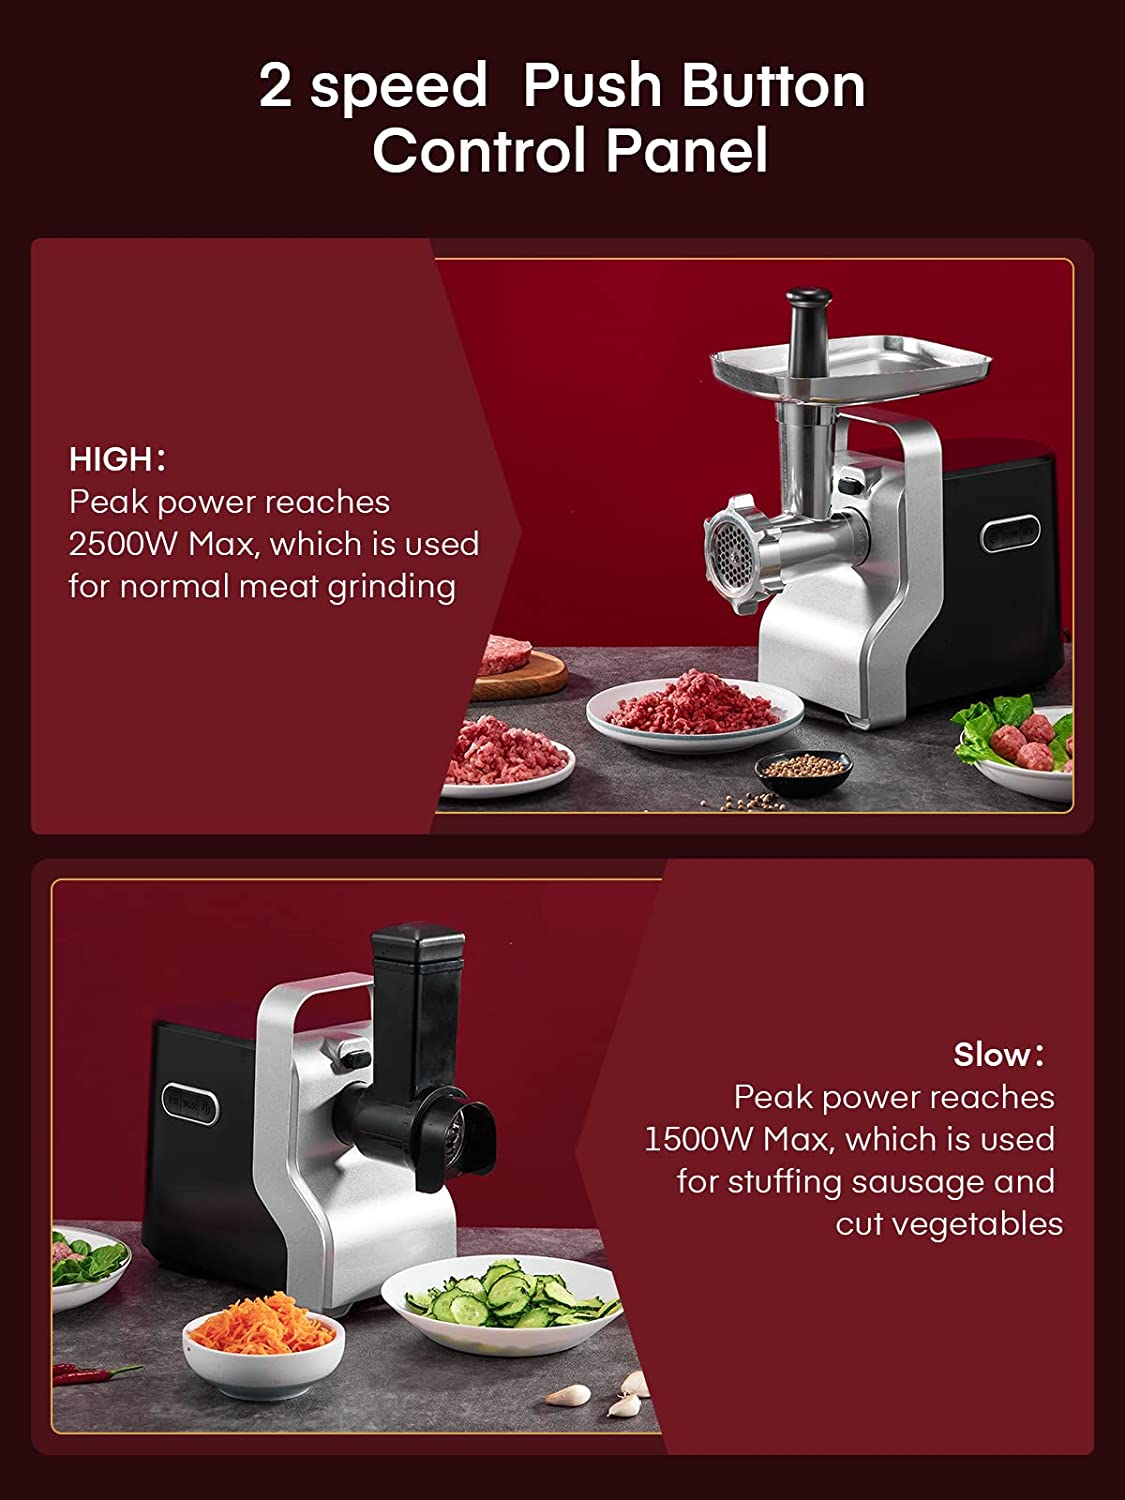 2 speed push button control paanel, Electric Meat Grinder Heavy Duty - 5 in 1 2500W Max Powerful Home Food Grinder - Sausage Stuffer - Slicer/Shredder/Grater - Kubbe & Tomato Juicing Kits - 3 Stainless Steel Grinding Plates - Size #12